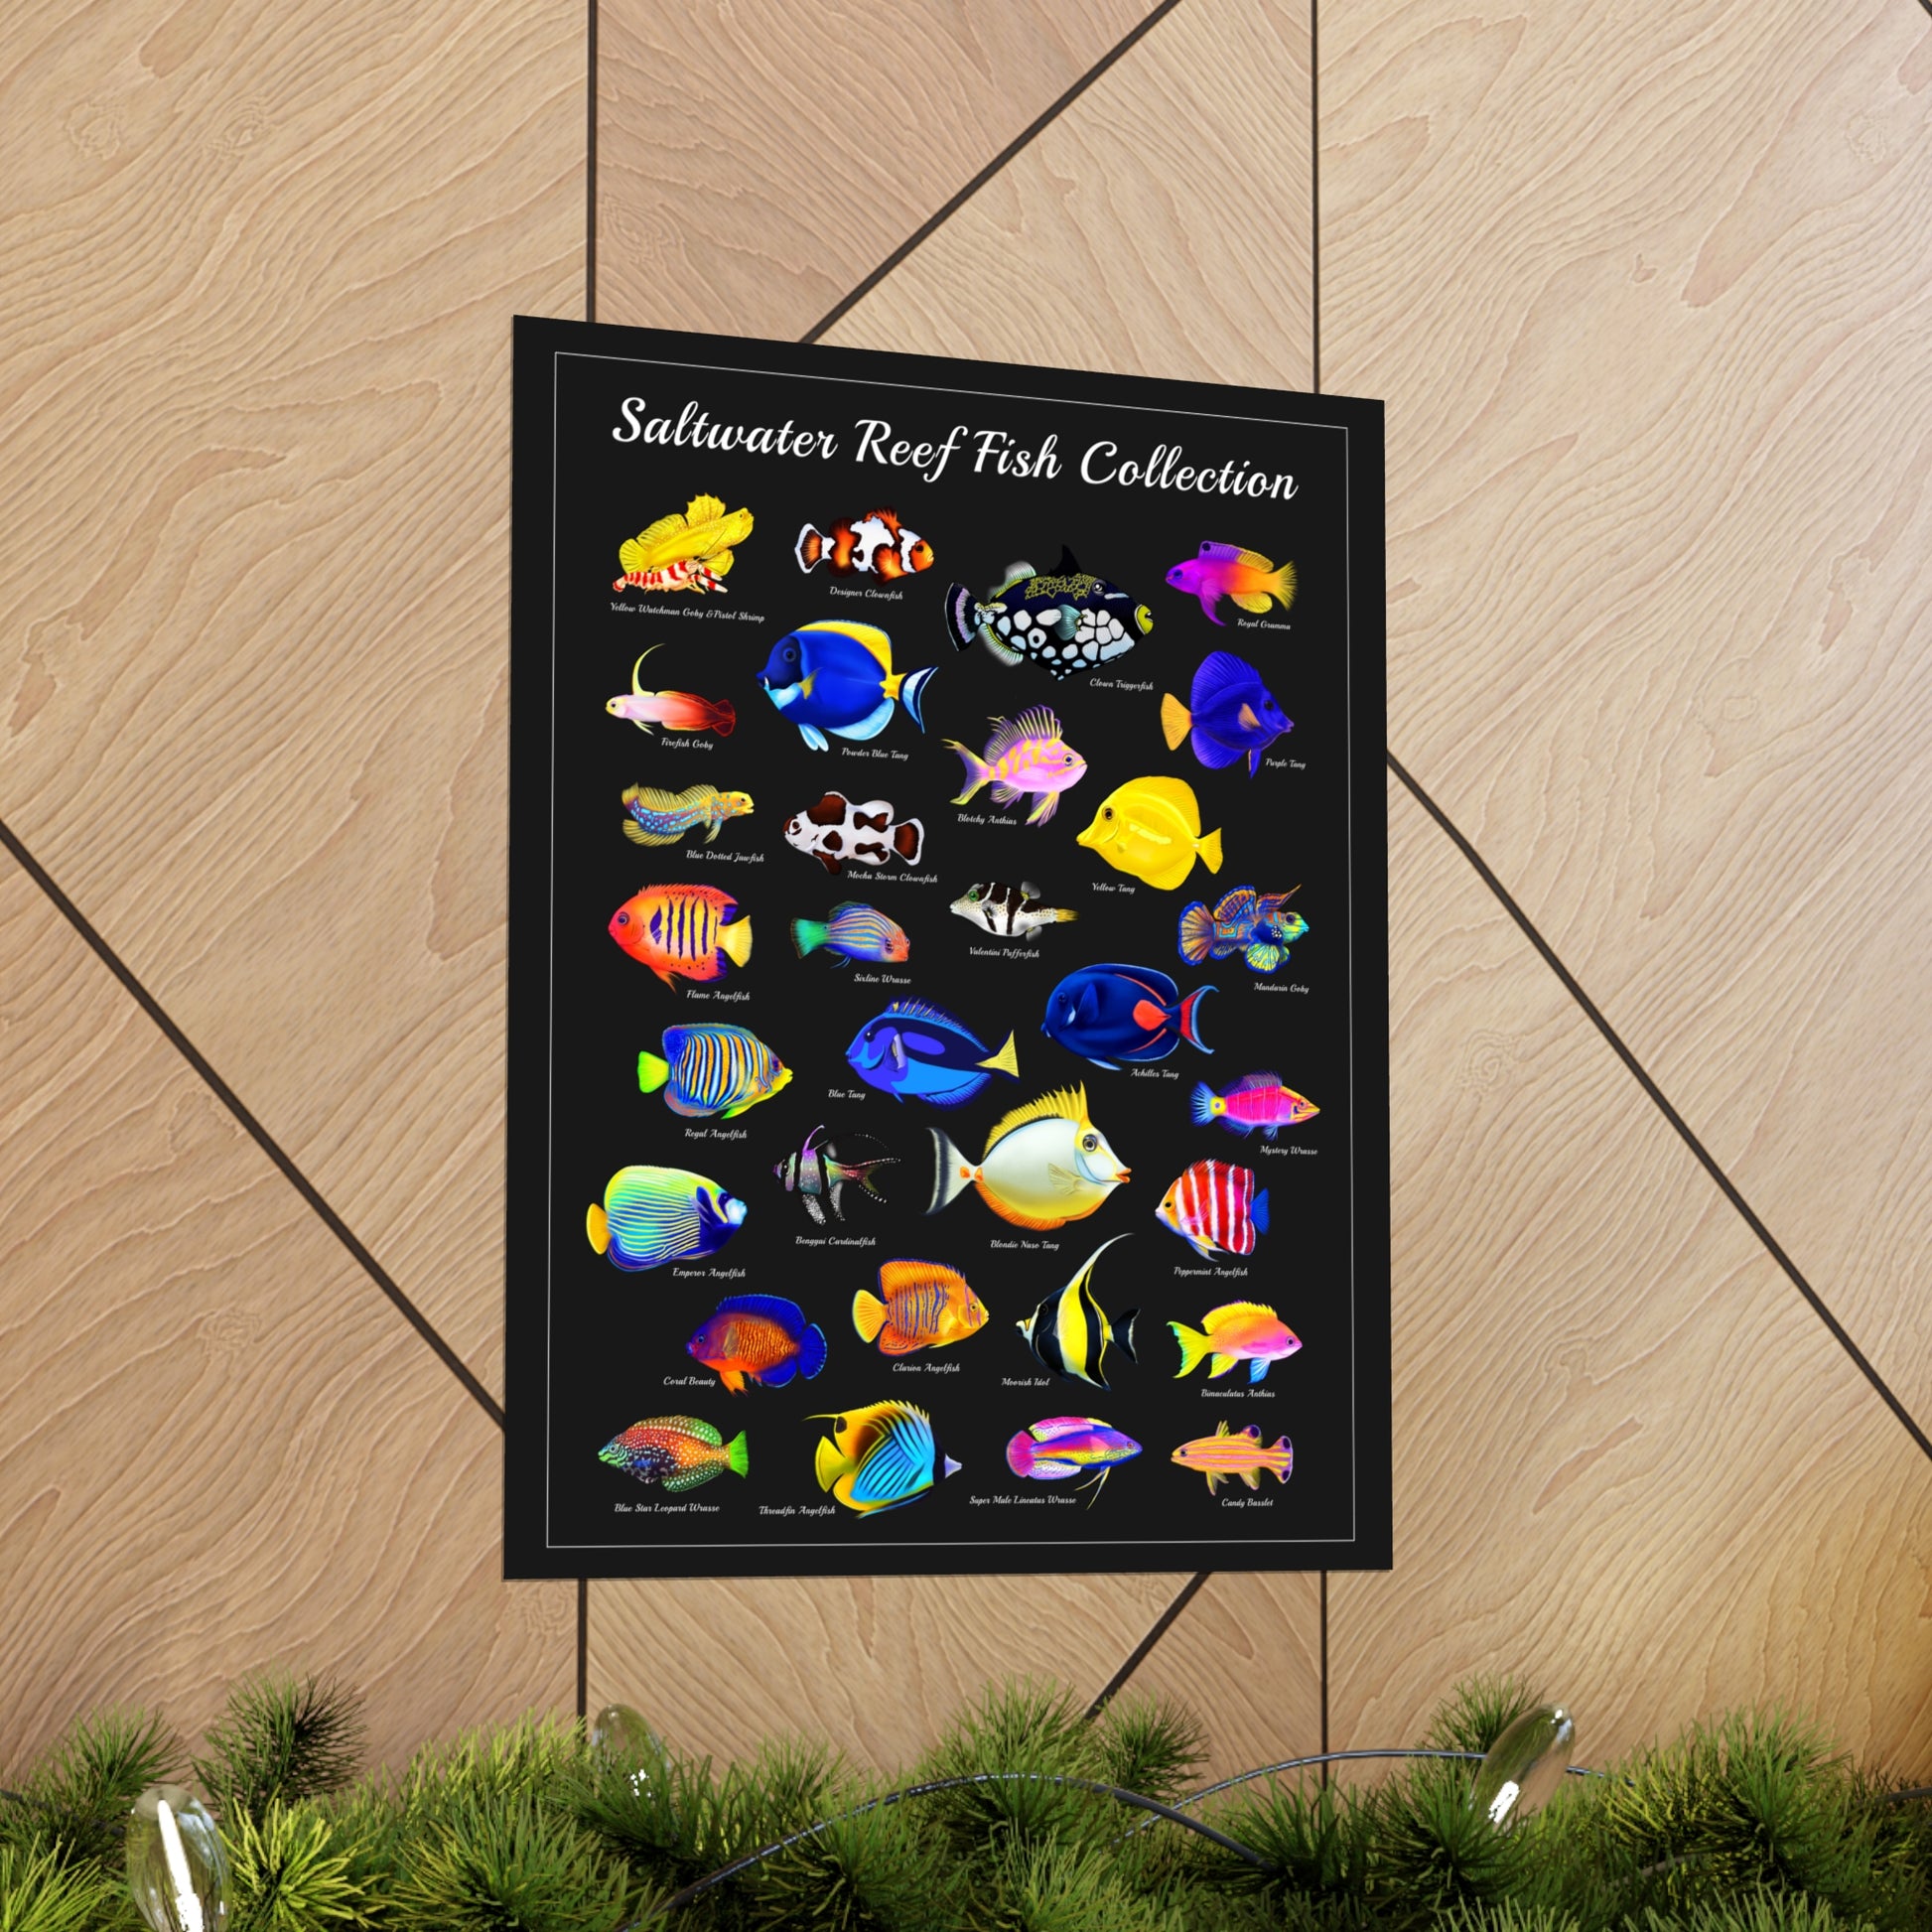 Saltwater Reef Fish Collection w/ Names - Reef of Clowns LLC